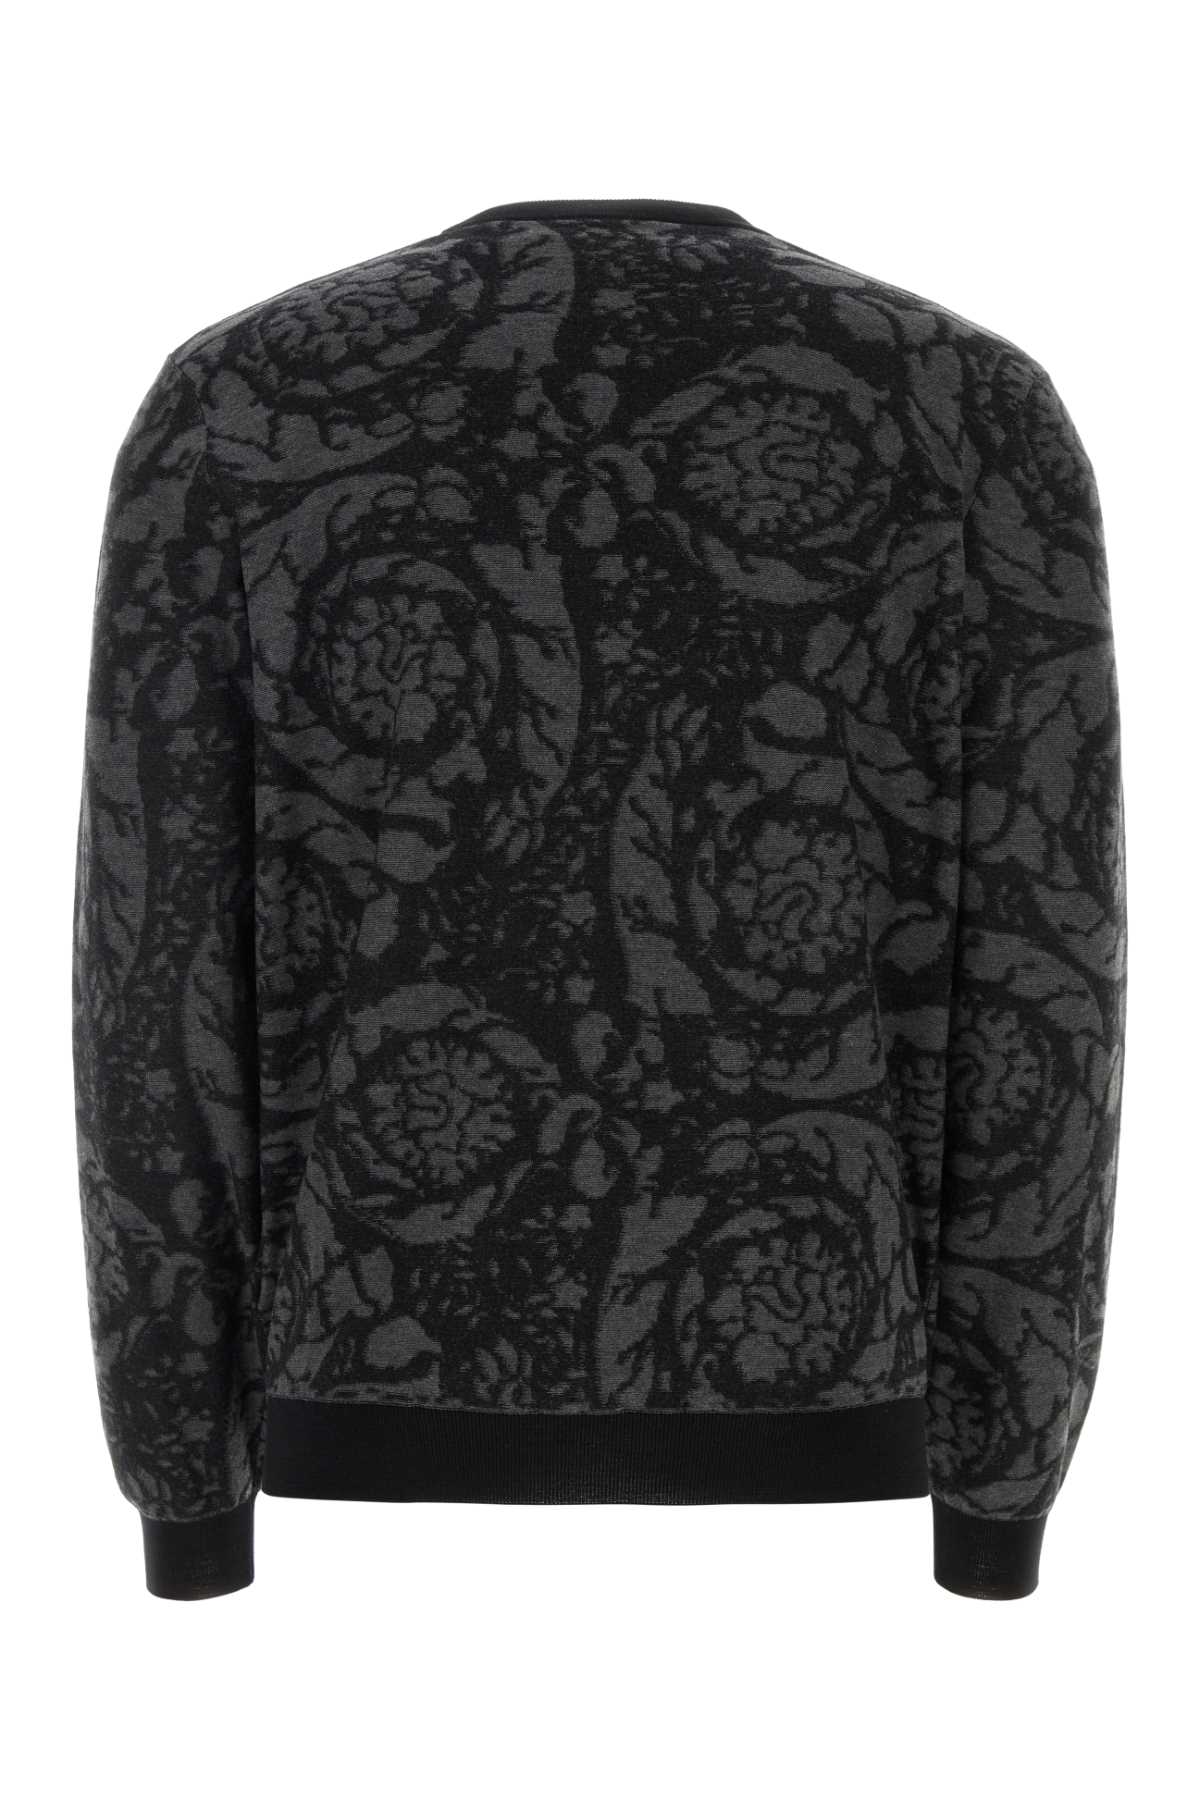 Versace Embroidered Wool Blend Sweater In Blackgrey